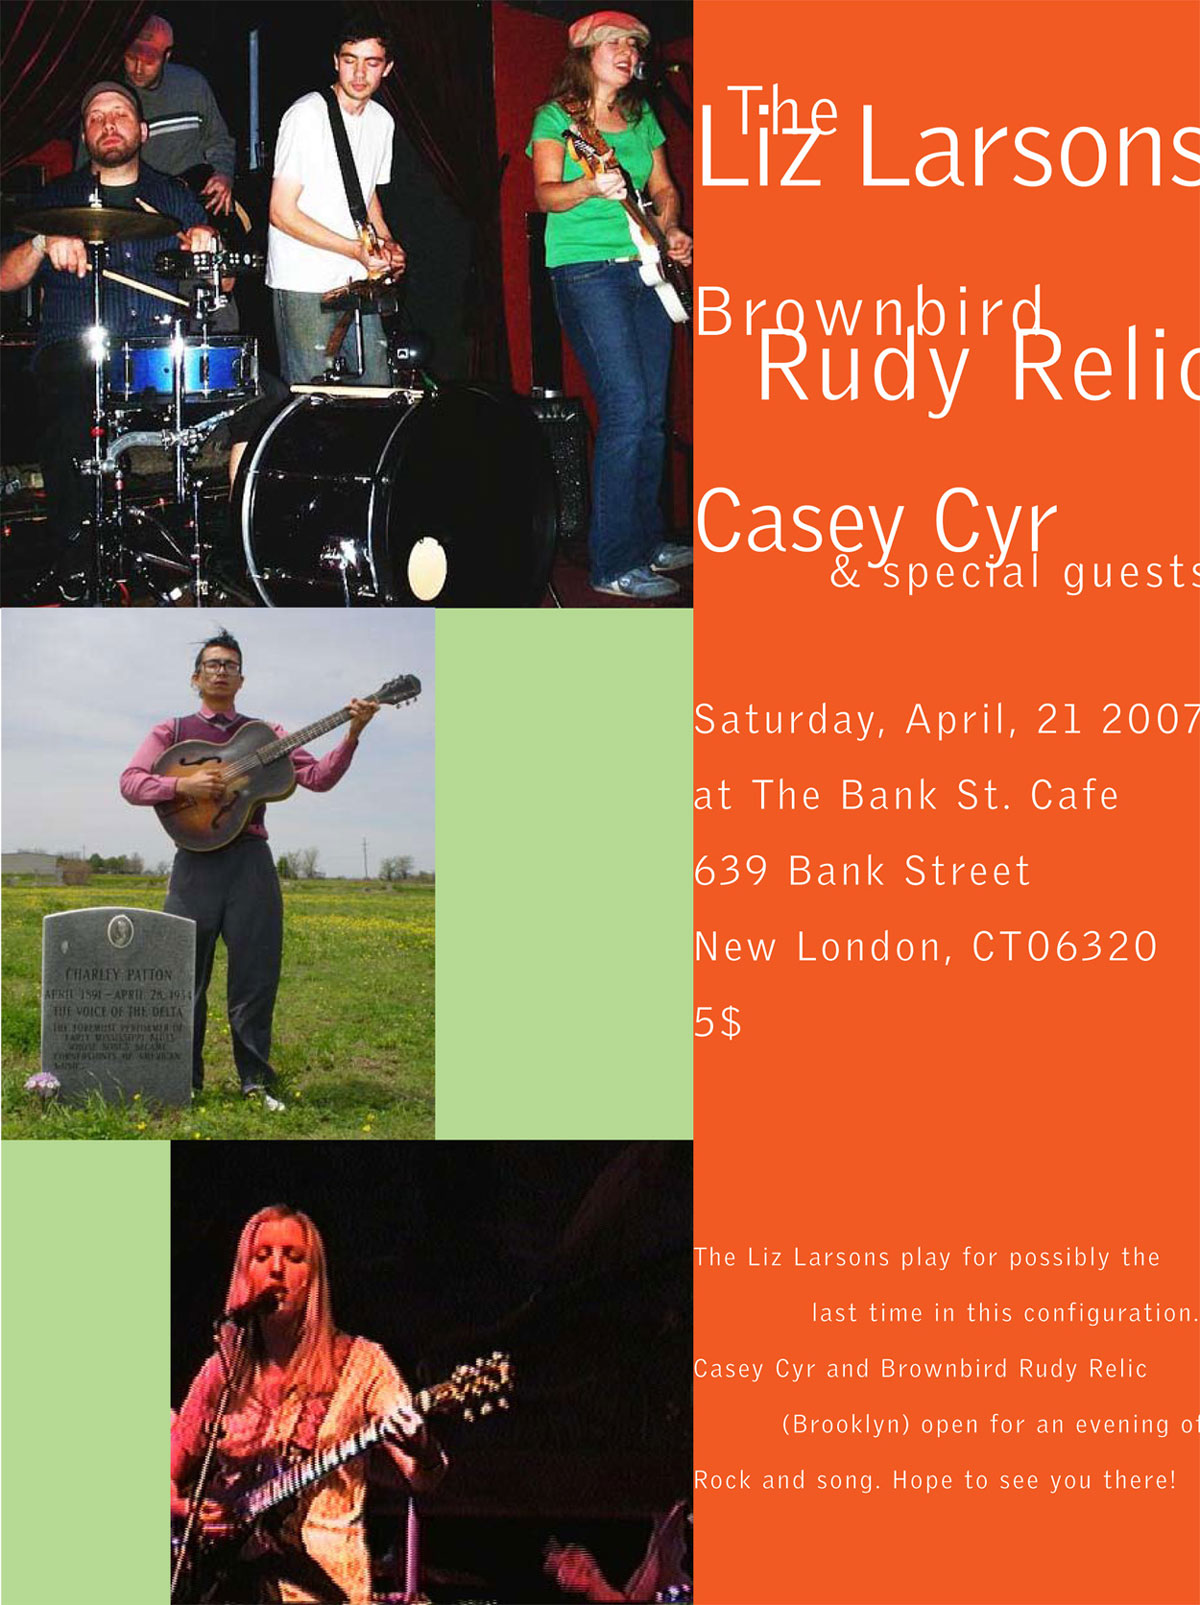 Casey Cyr - The Liz Larsons, Brownbird Rudy Relic - at the Bank Street Cafe, New London, Connecticut